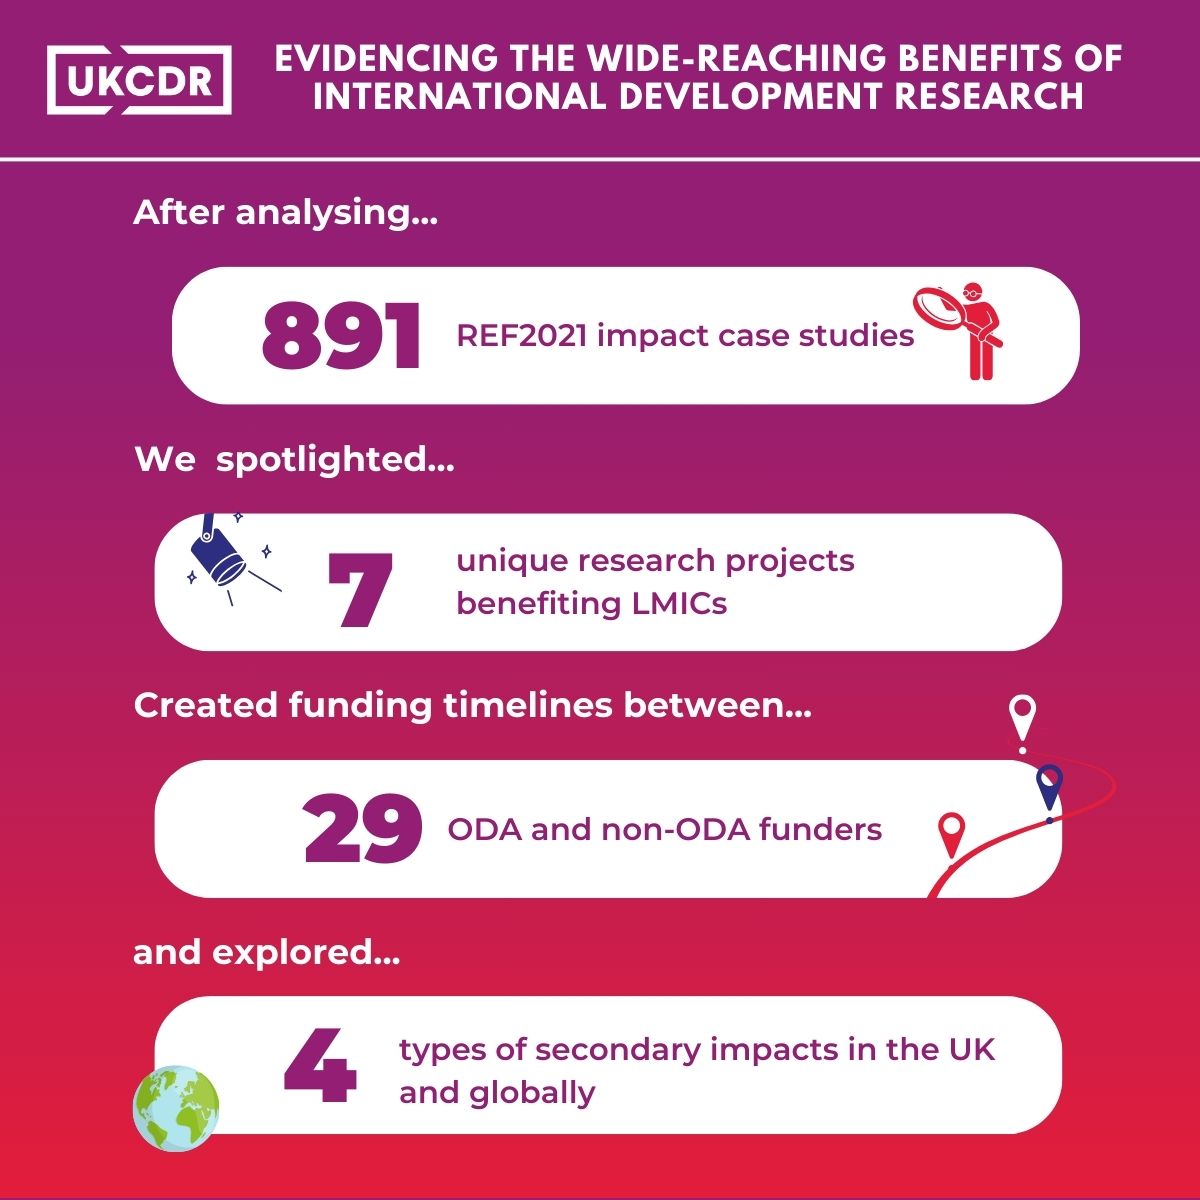 Curious about our latest booklet? Take a look at how we used over 800 #REF2021 case studies to find 7 unique projects detailing the impact of research for development, funding partnerships, & more! 👉bit.ly/3vJxVWH